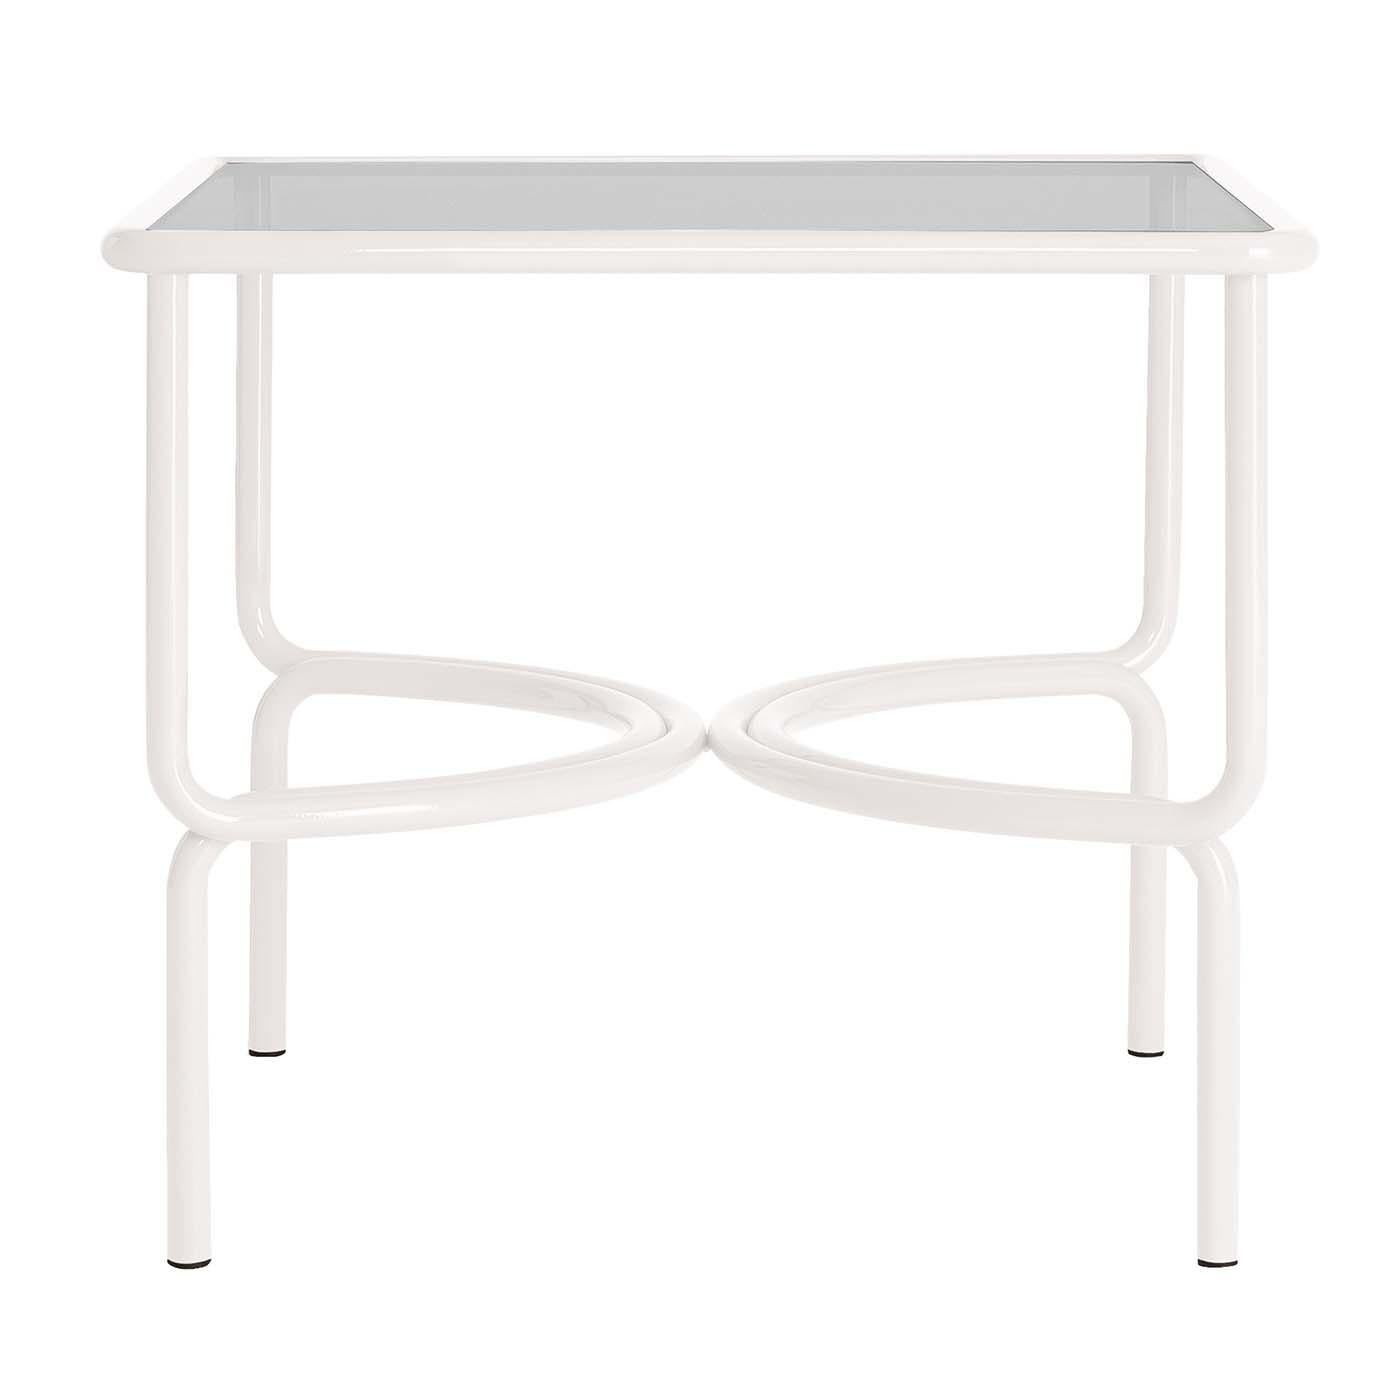 Hand-Crafted Locus Solus White Dining Table by Gae Aulenti